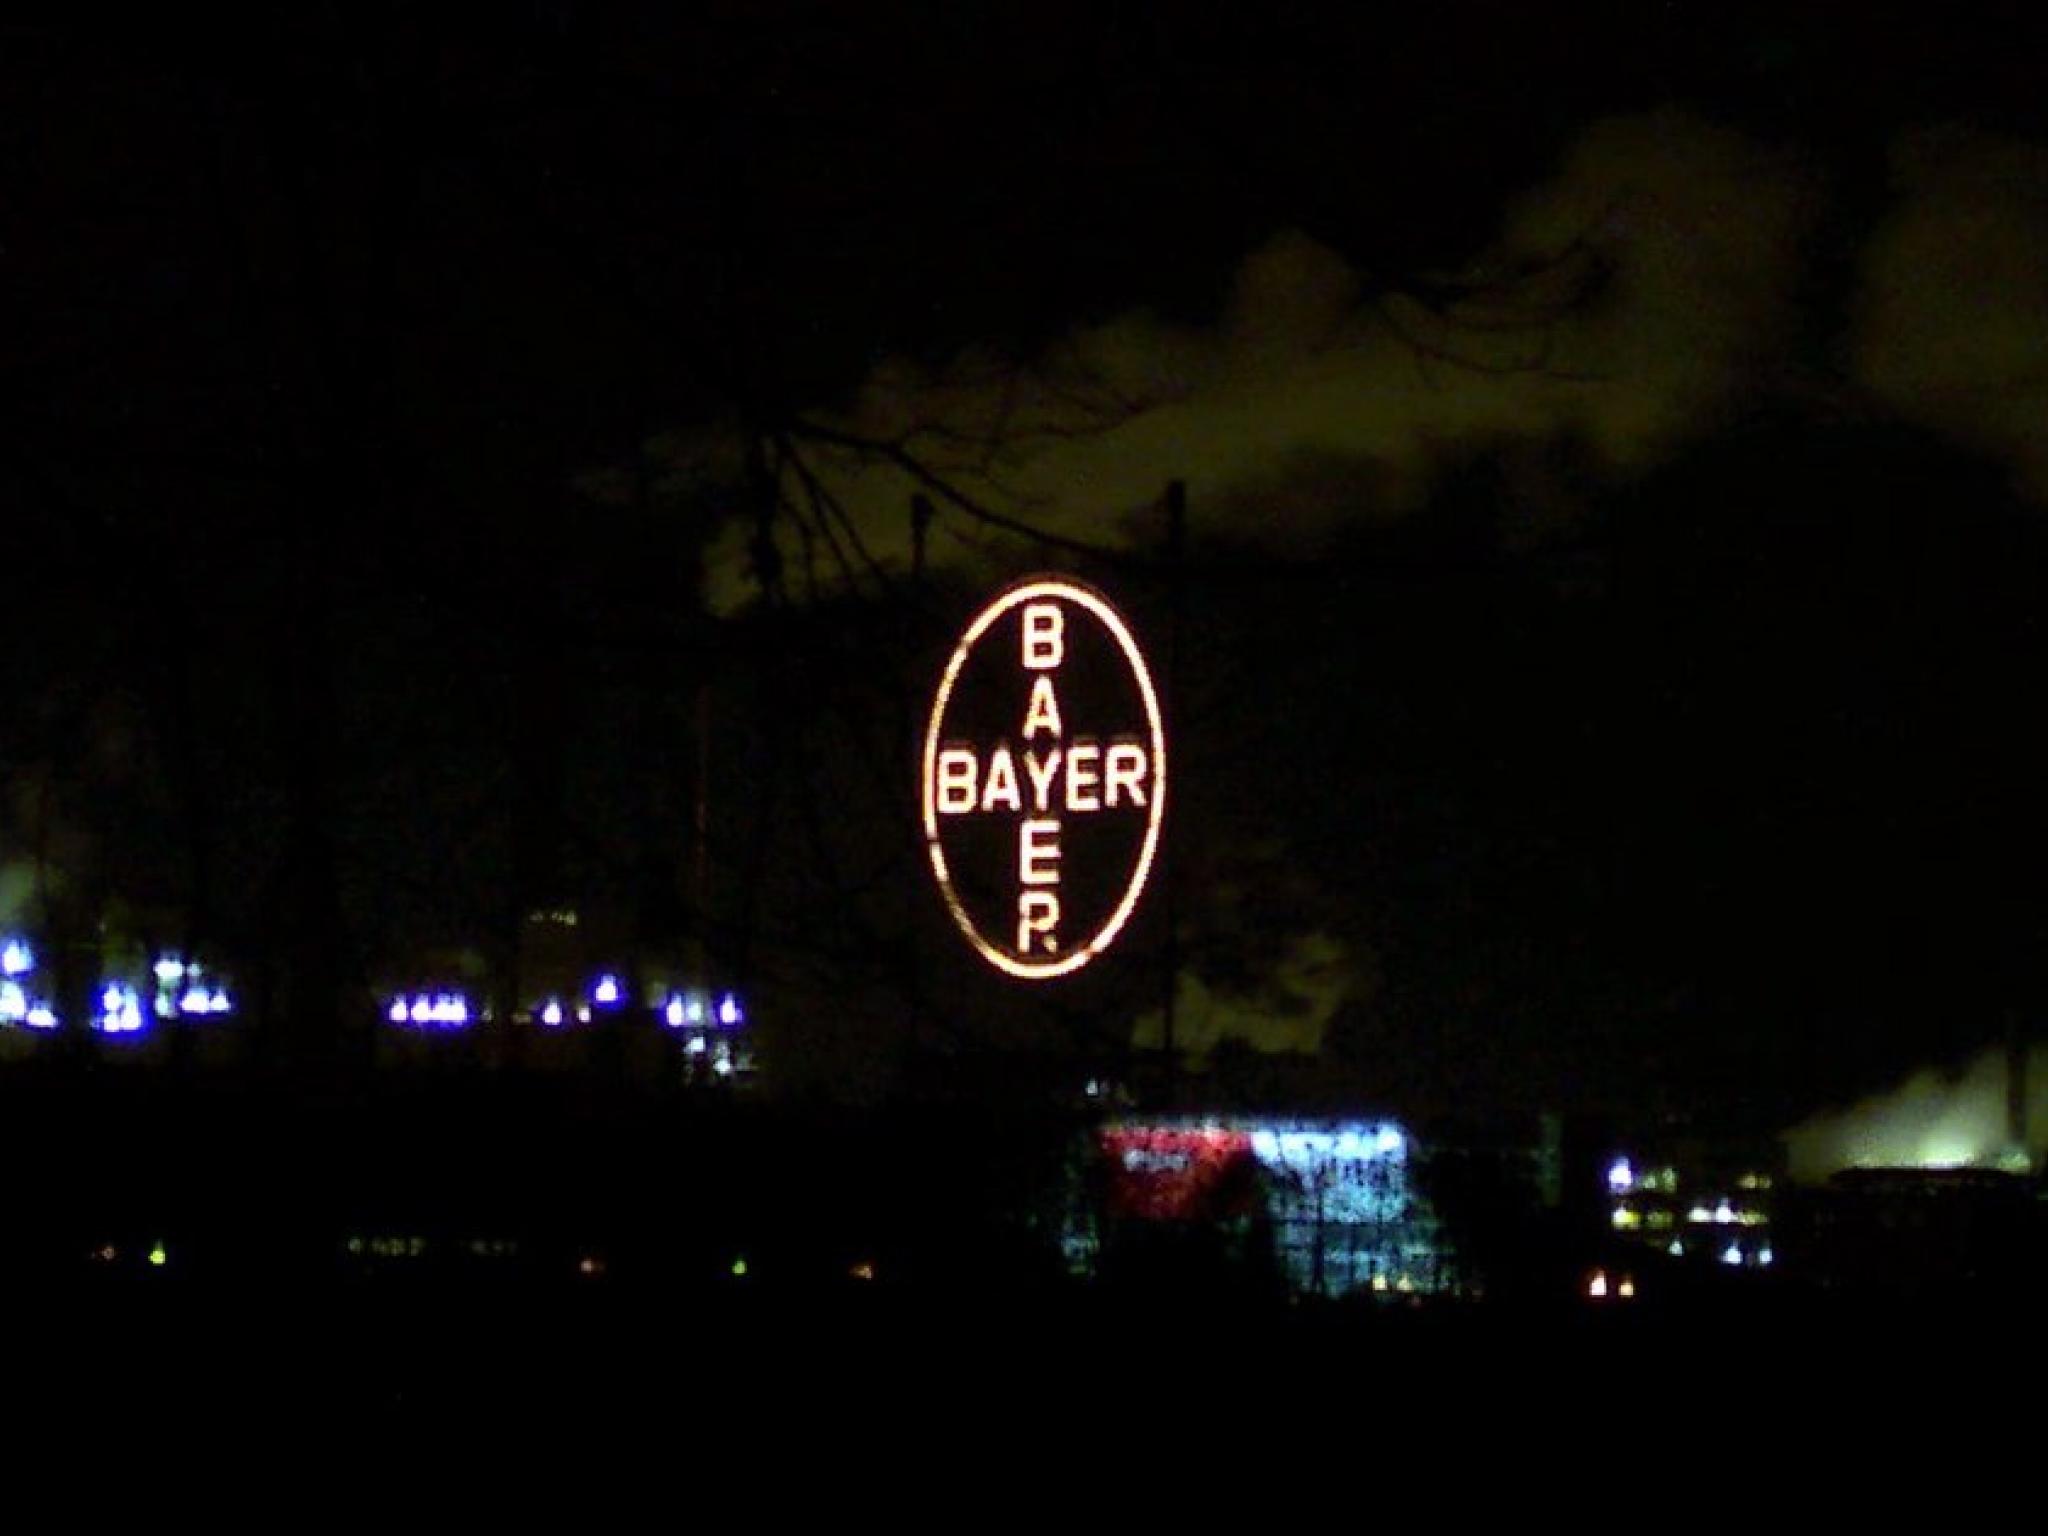  bayer-holds-splitting-into-separate-units-for-three-years-focus-shifts-on-tackling-challenges 